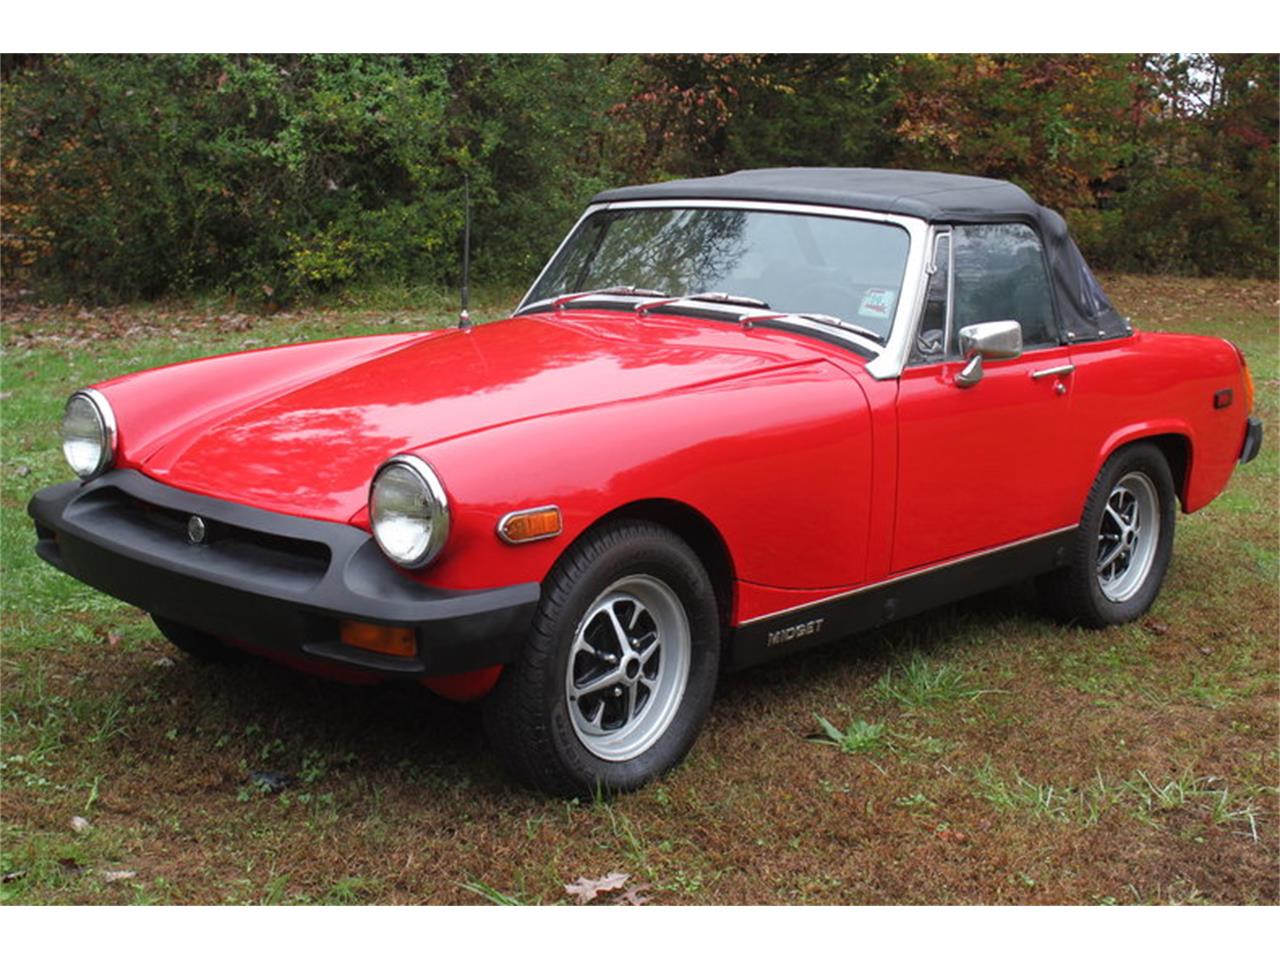 1975 MG Midget 1500 75 LHD SOLD | Car And Classic